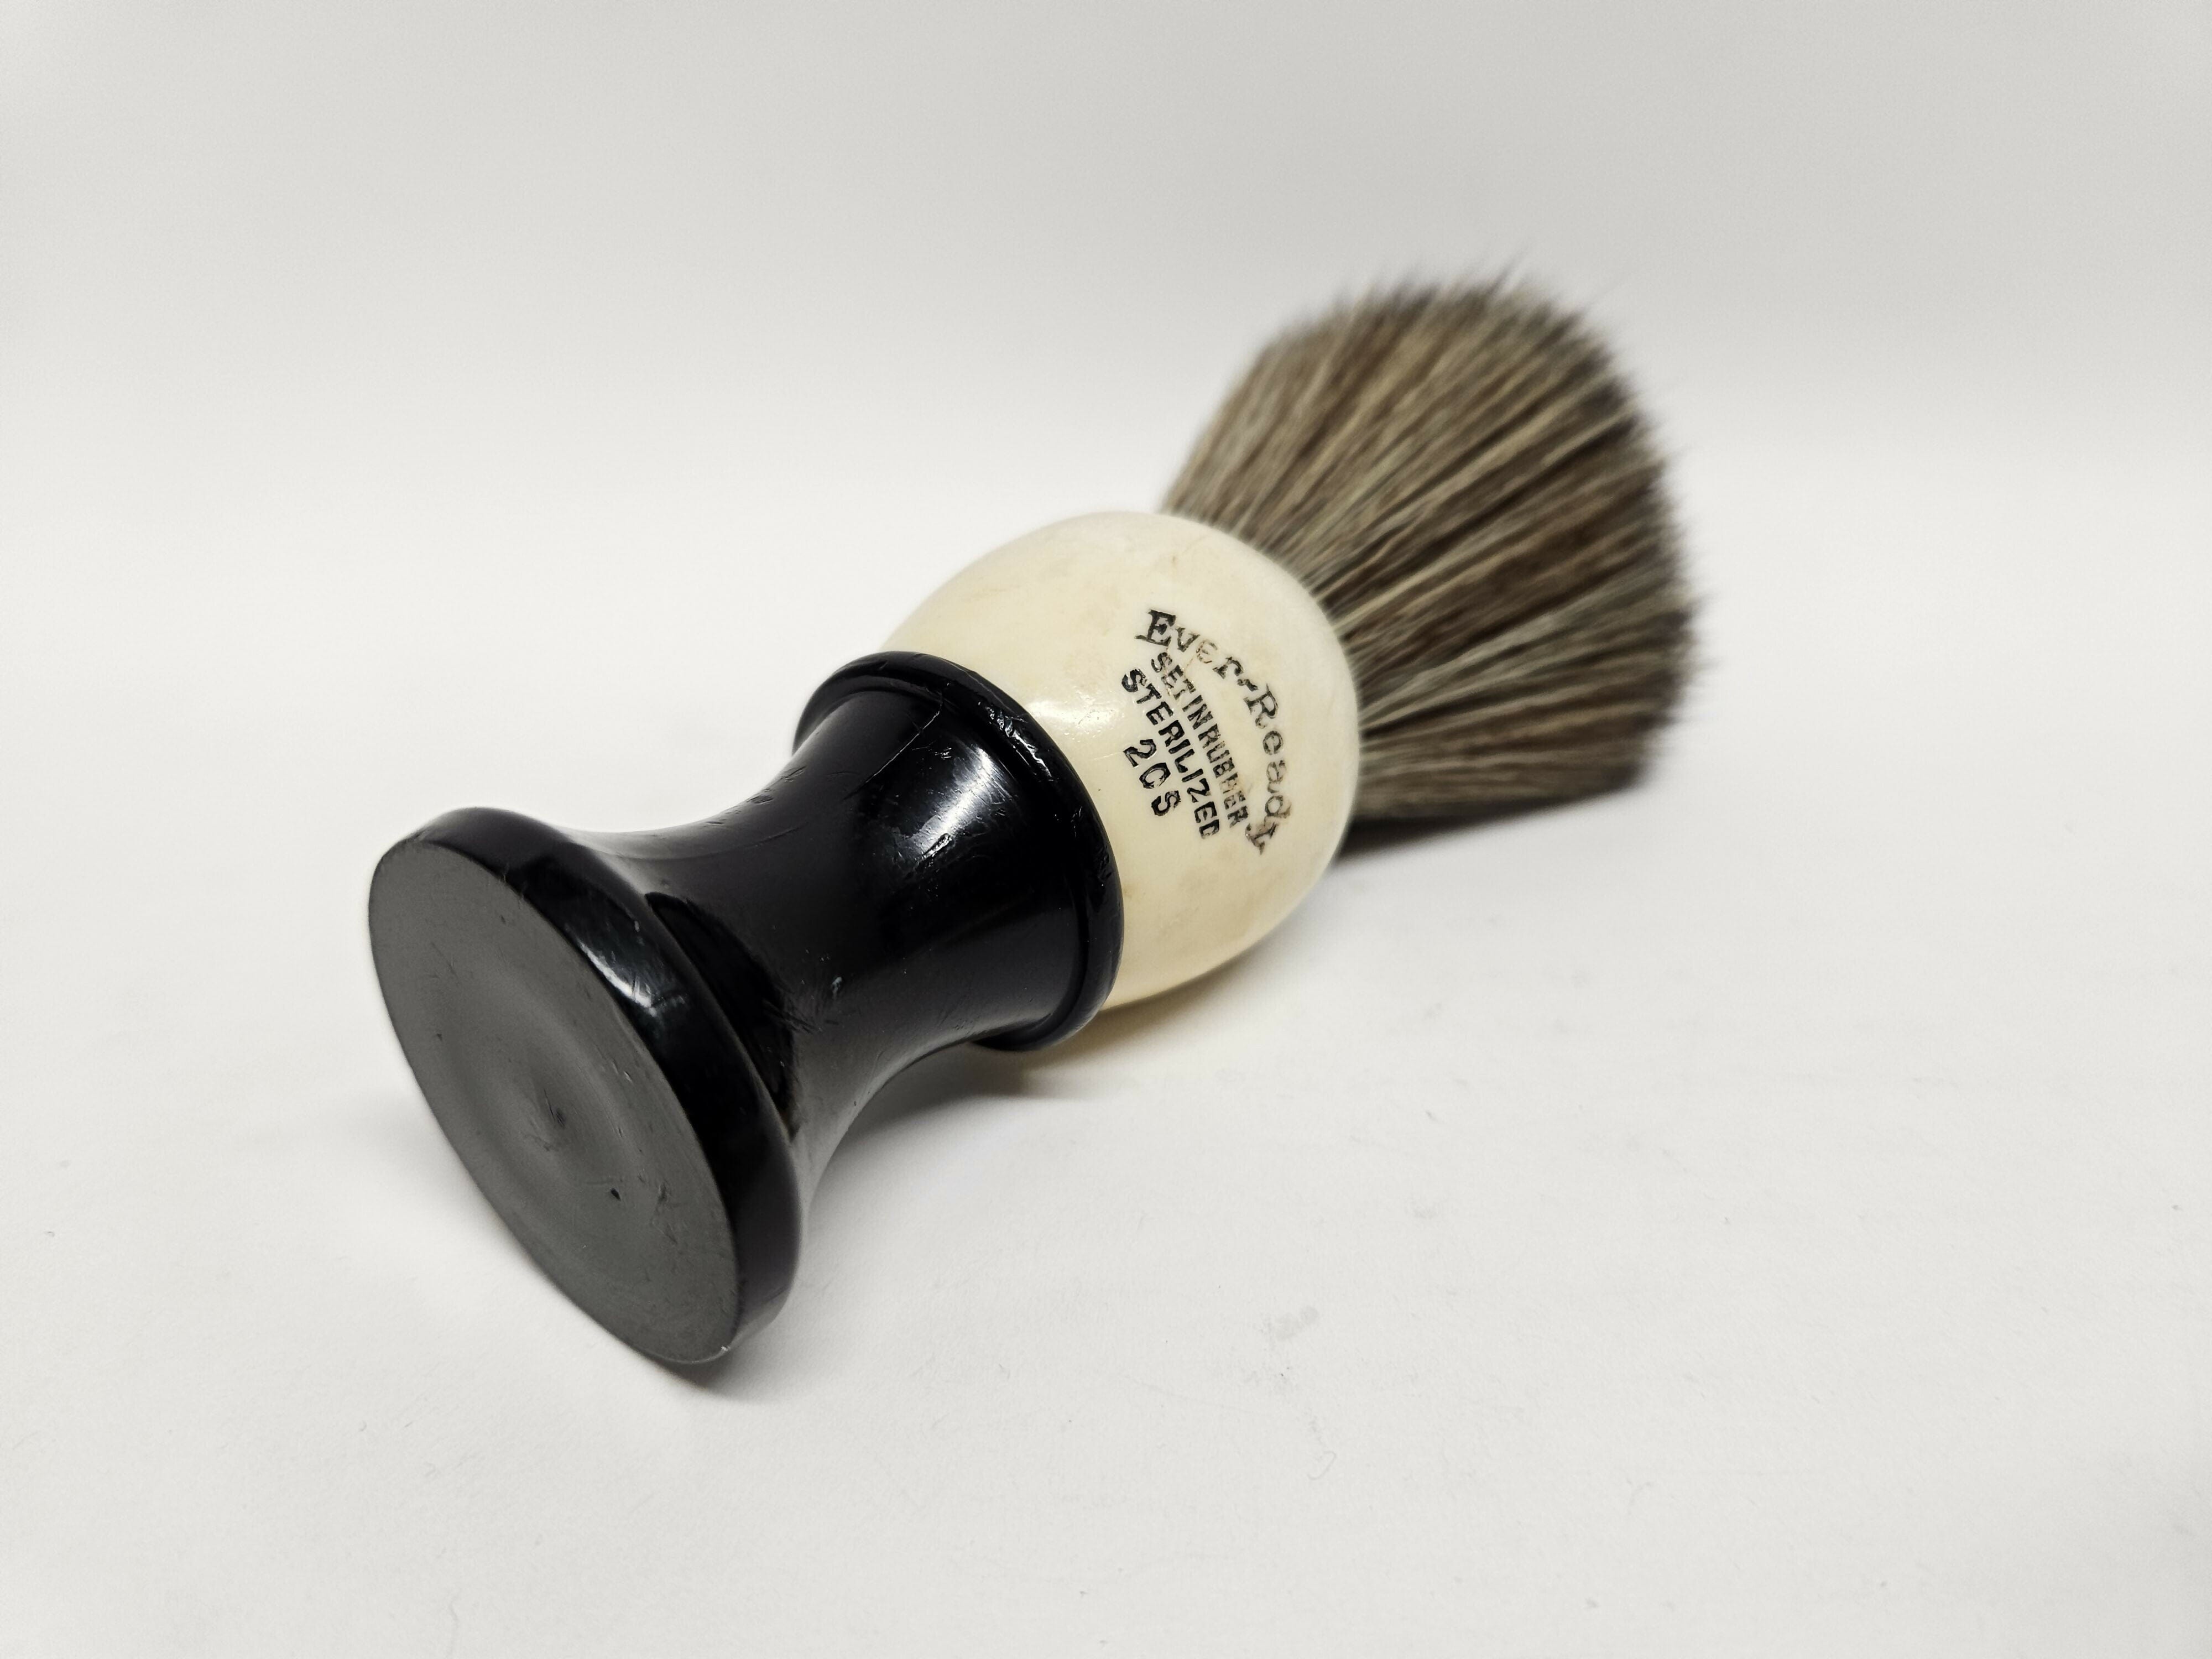 Vintage Ever-Ready 20S 23mm Shave Brush Shaving Brush Talent Soap Factory 